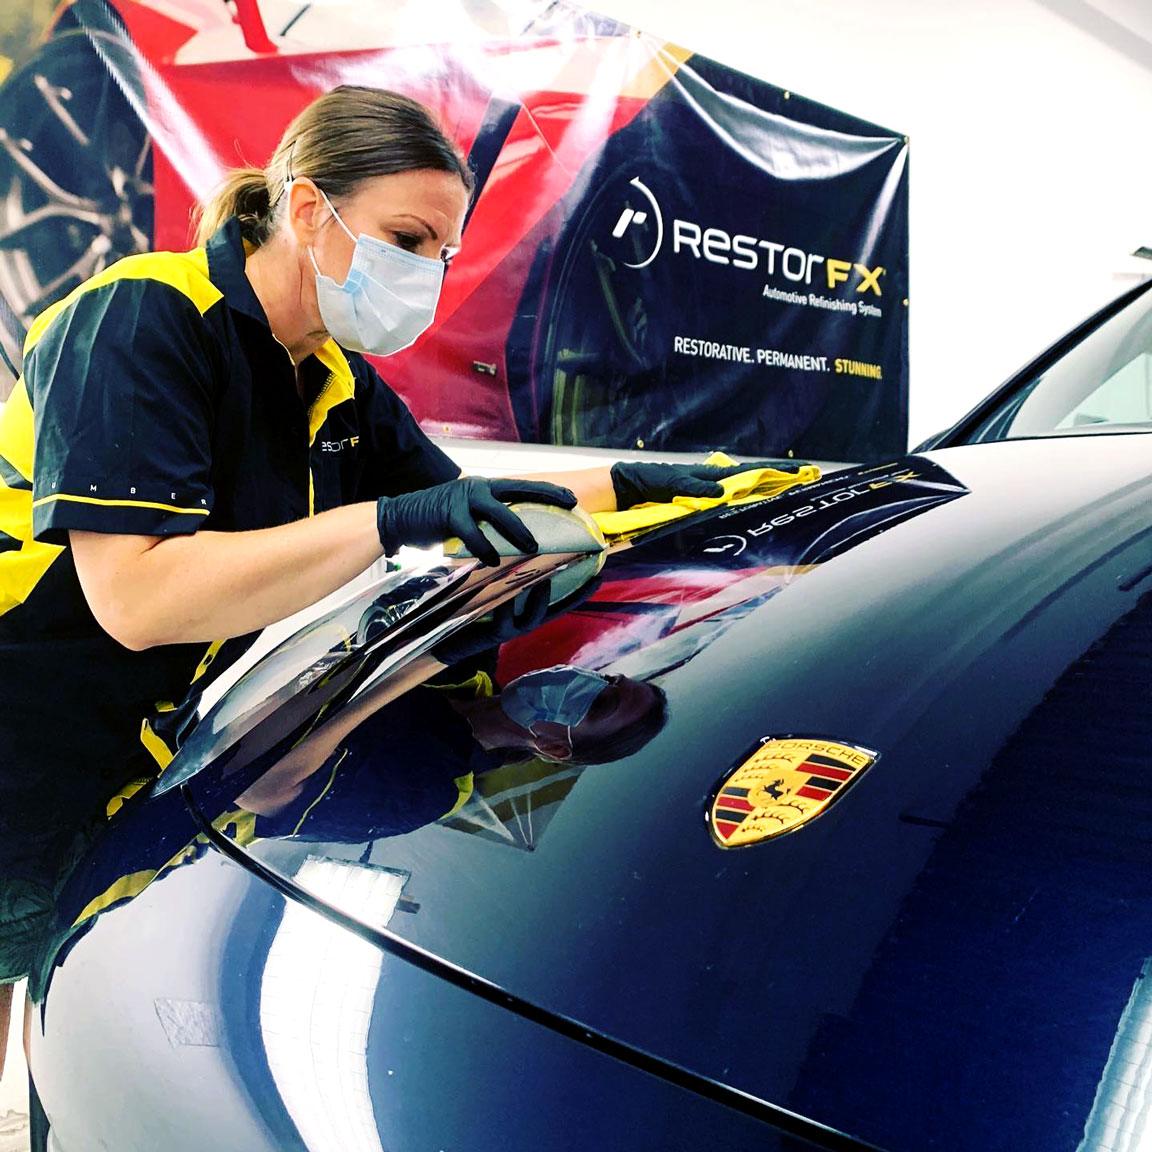 Technician wears mask while wiping the front of black Porsche during paint restoration at shop area